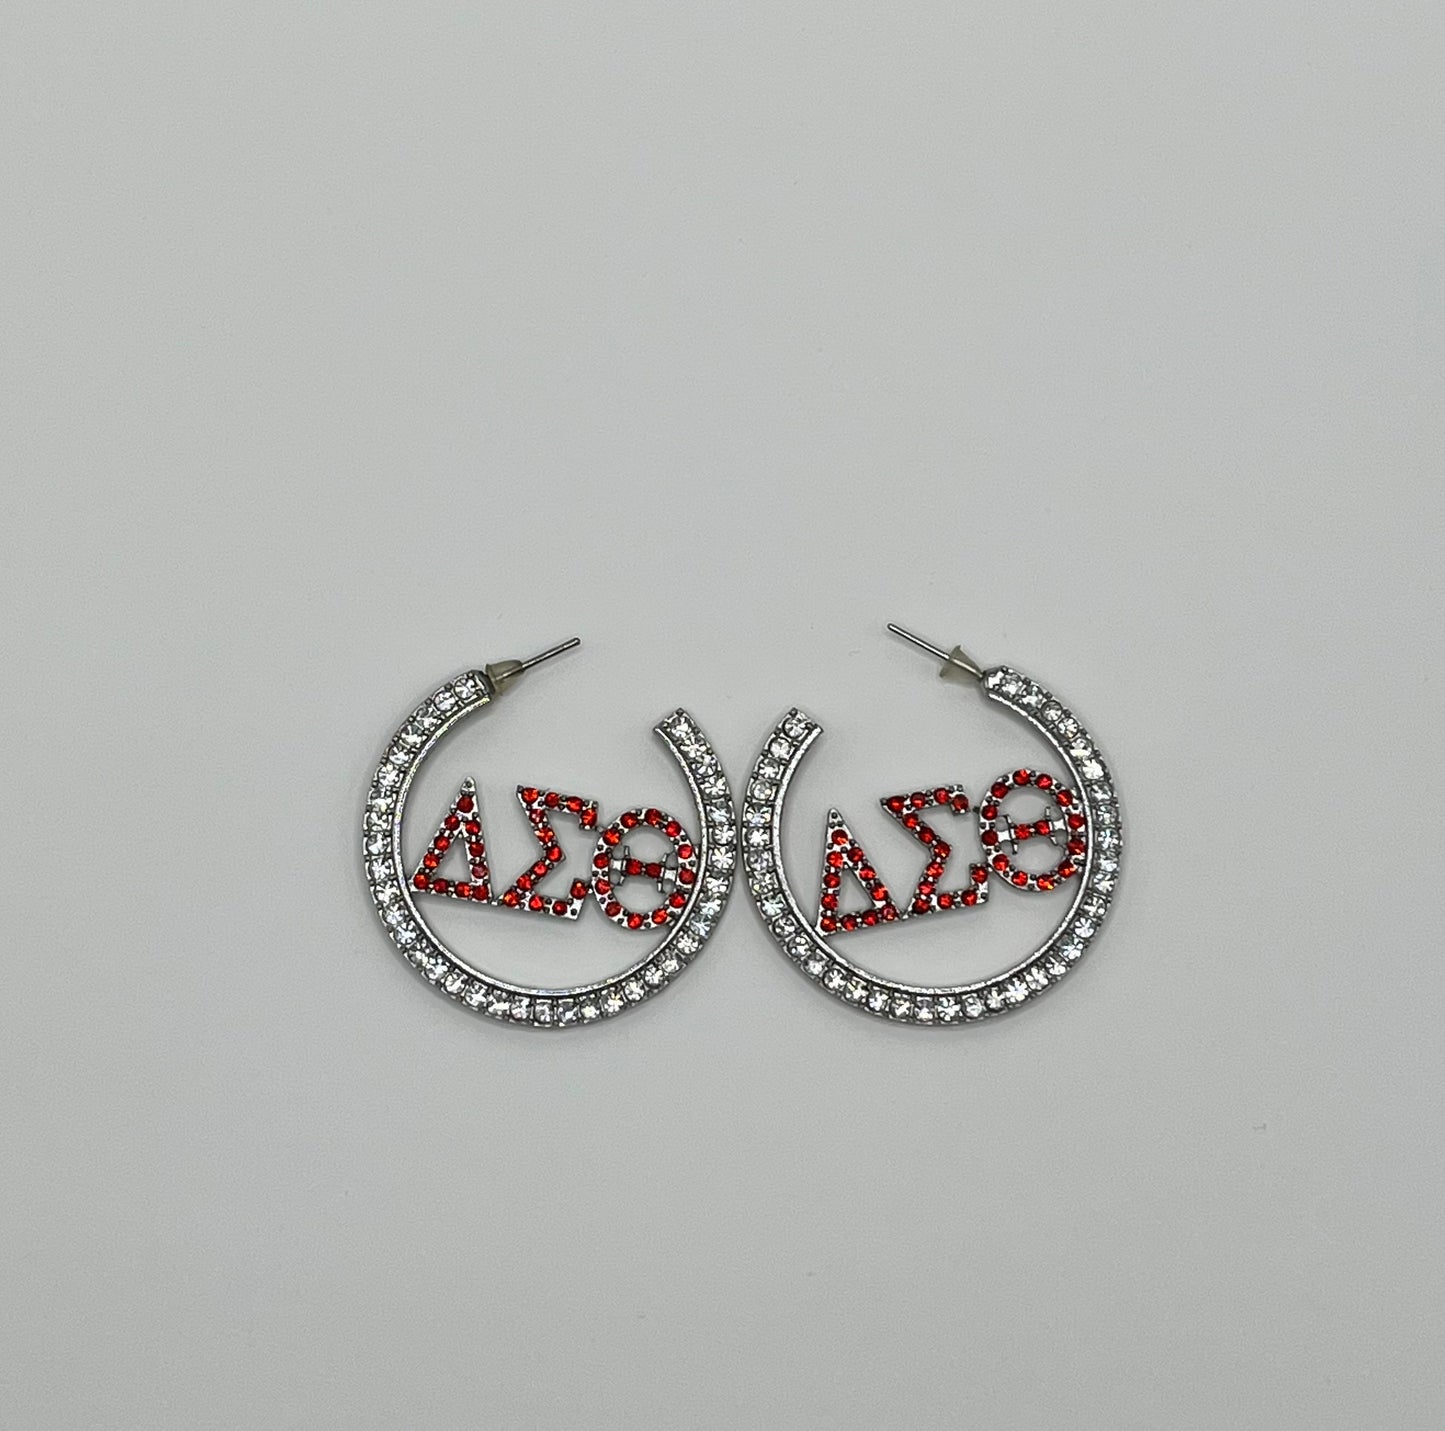 DST Crystal and Red Rhinestone Earrings with Symbols